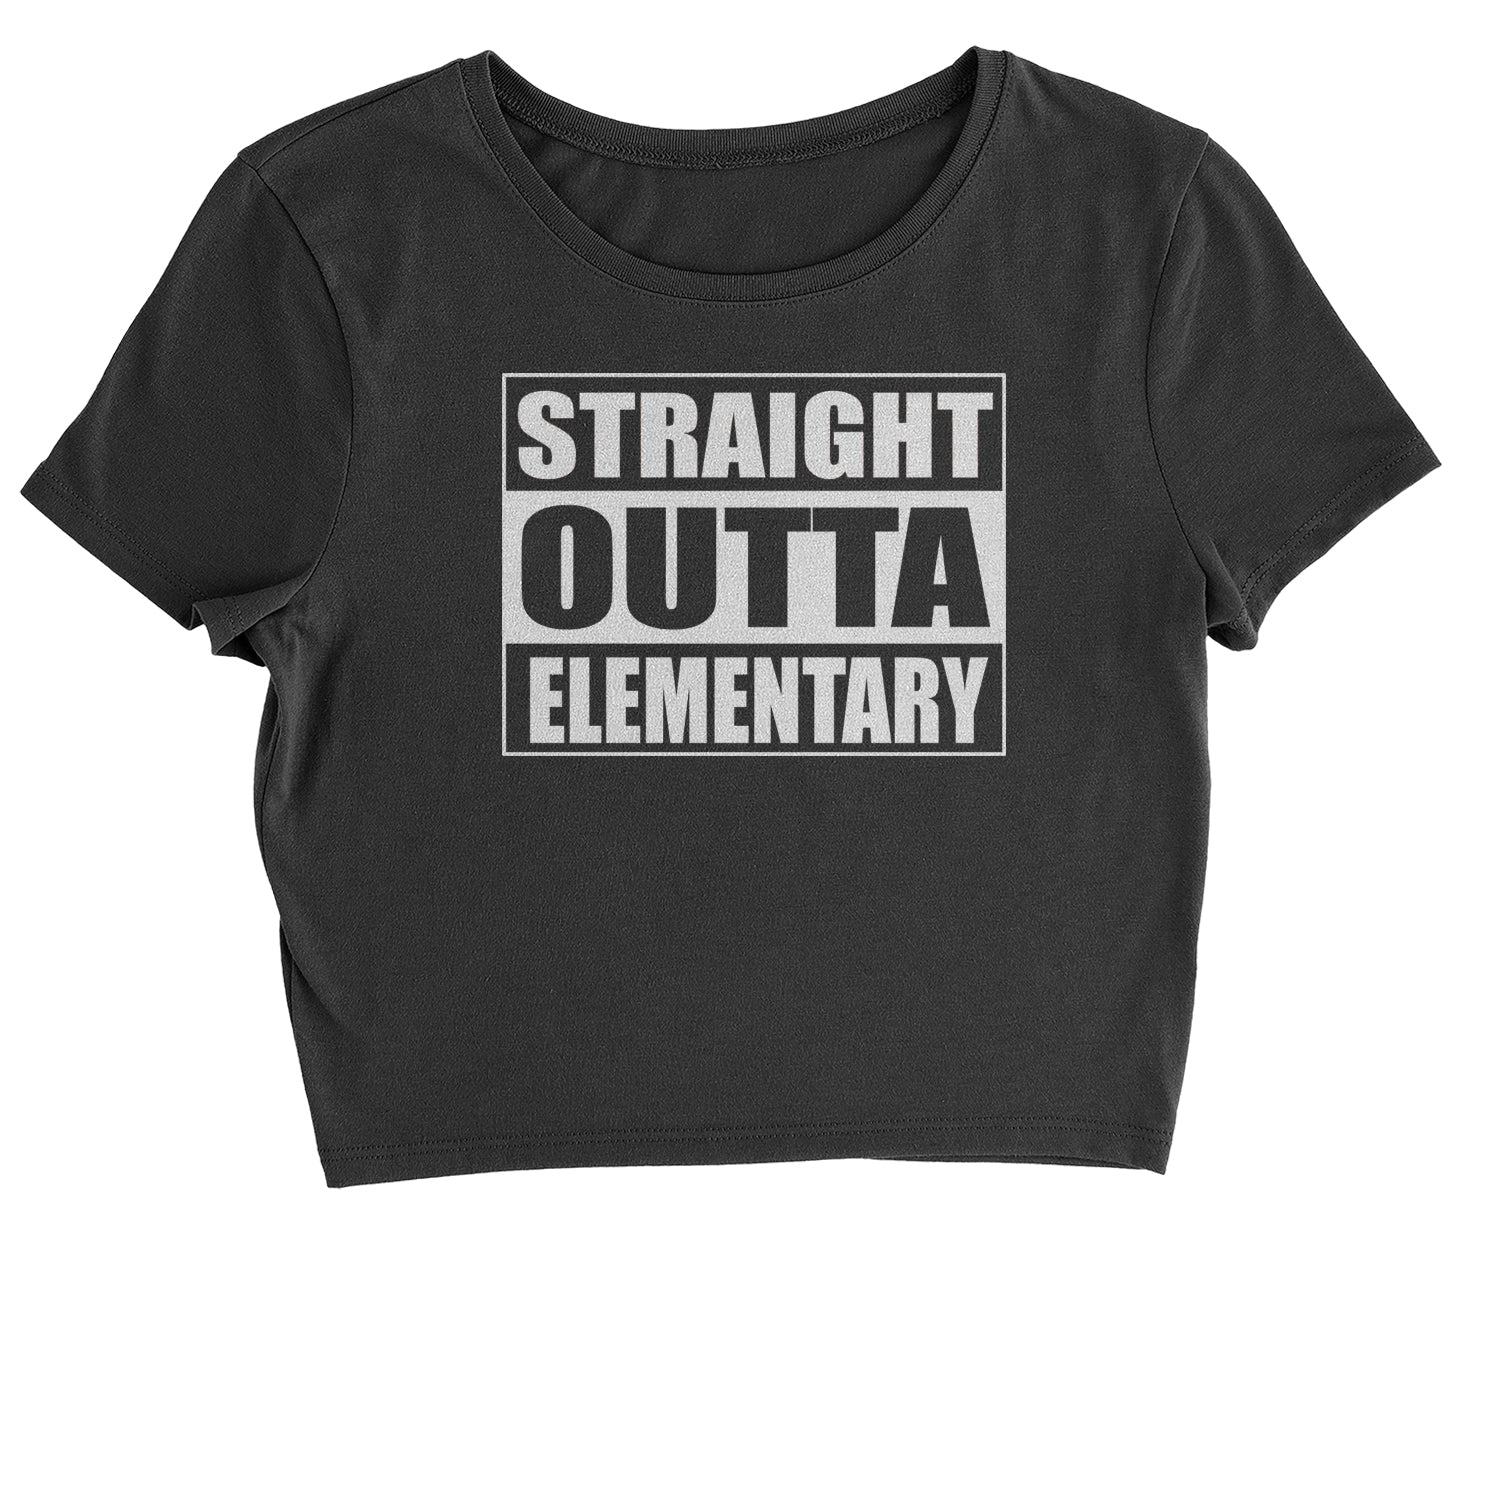 Straight Outta Elementary Cropped T-Shirt 2020, 2021, 2022, class, of, quarantine, queen by Expression Tees